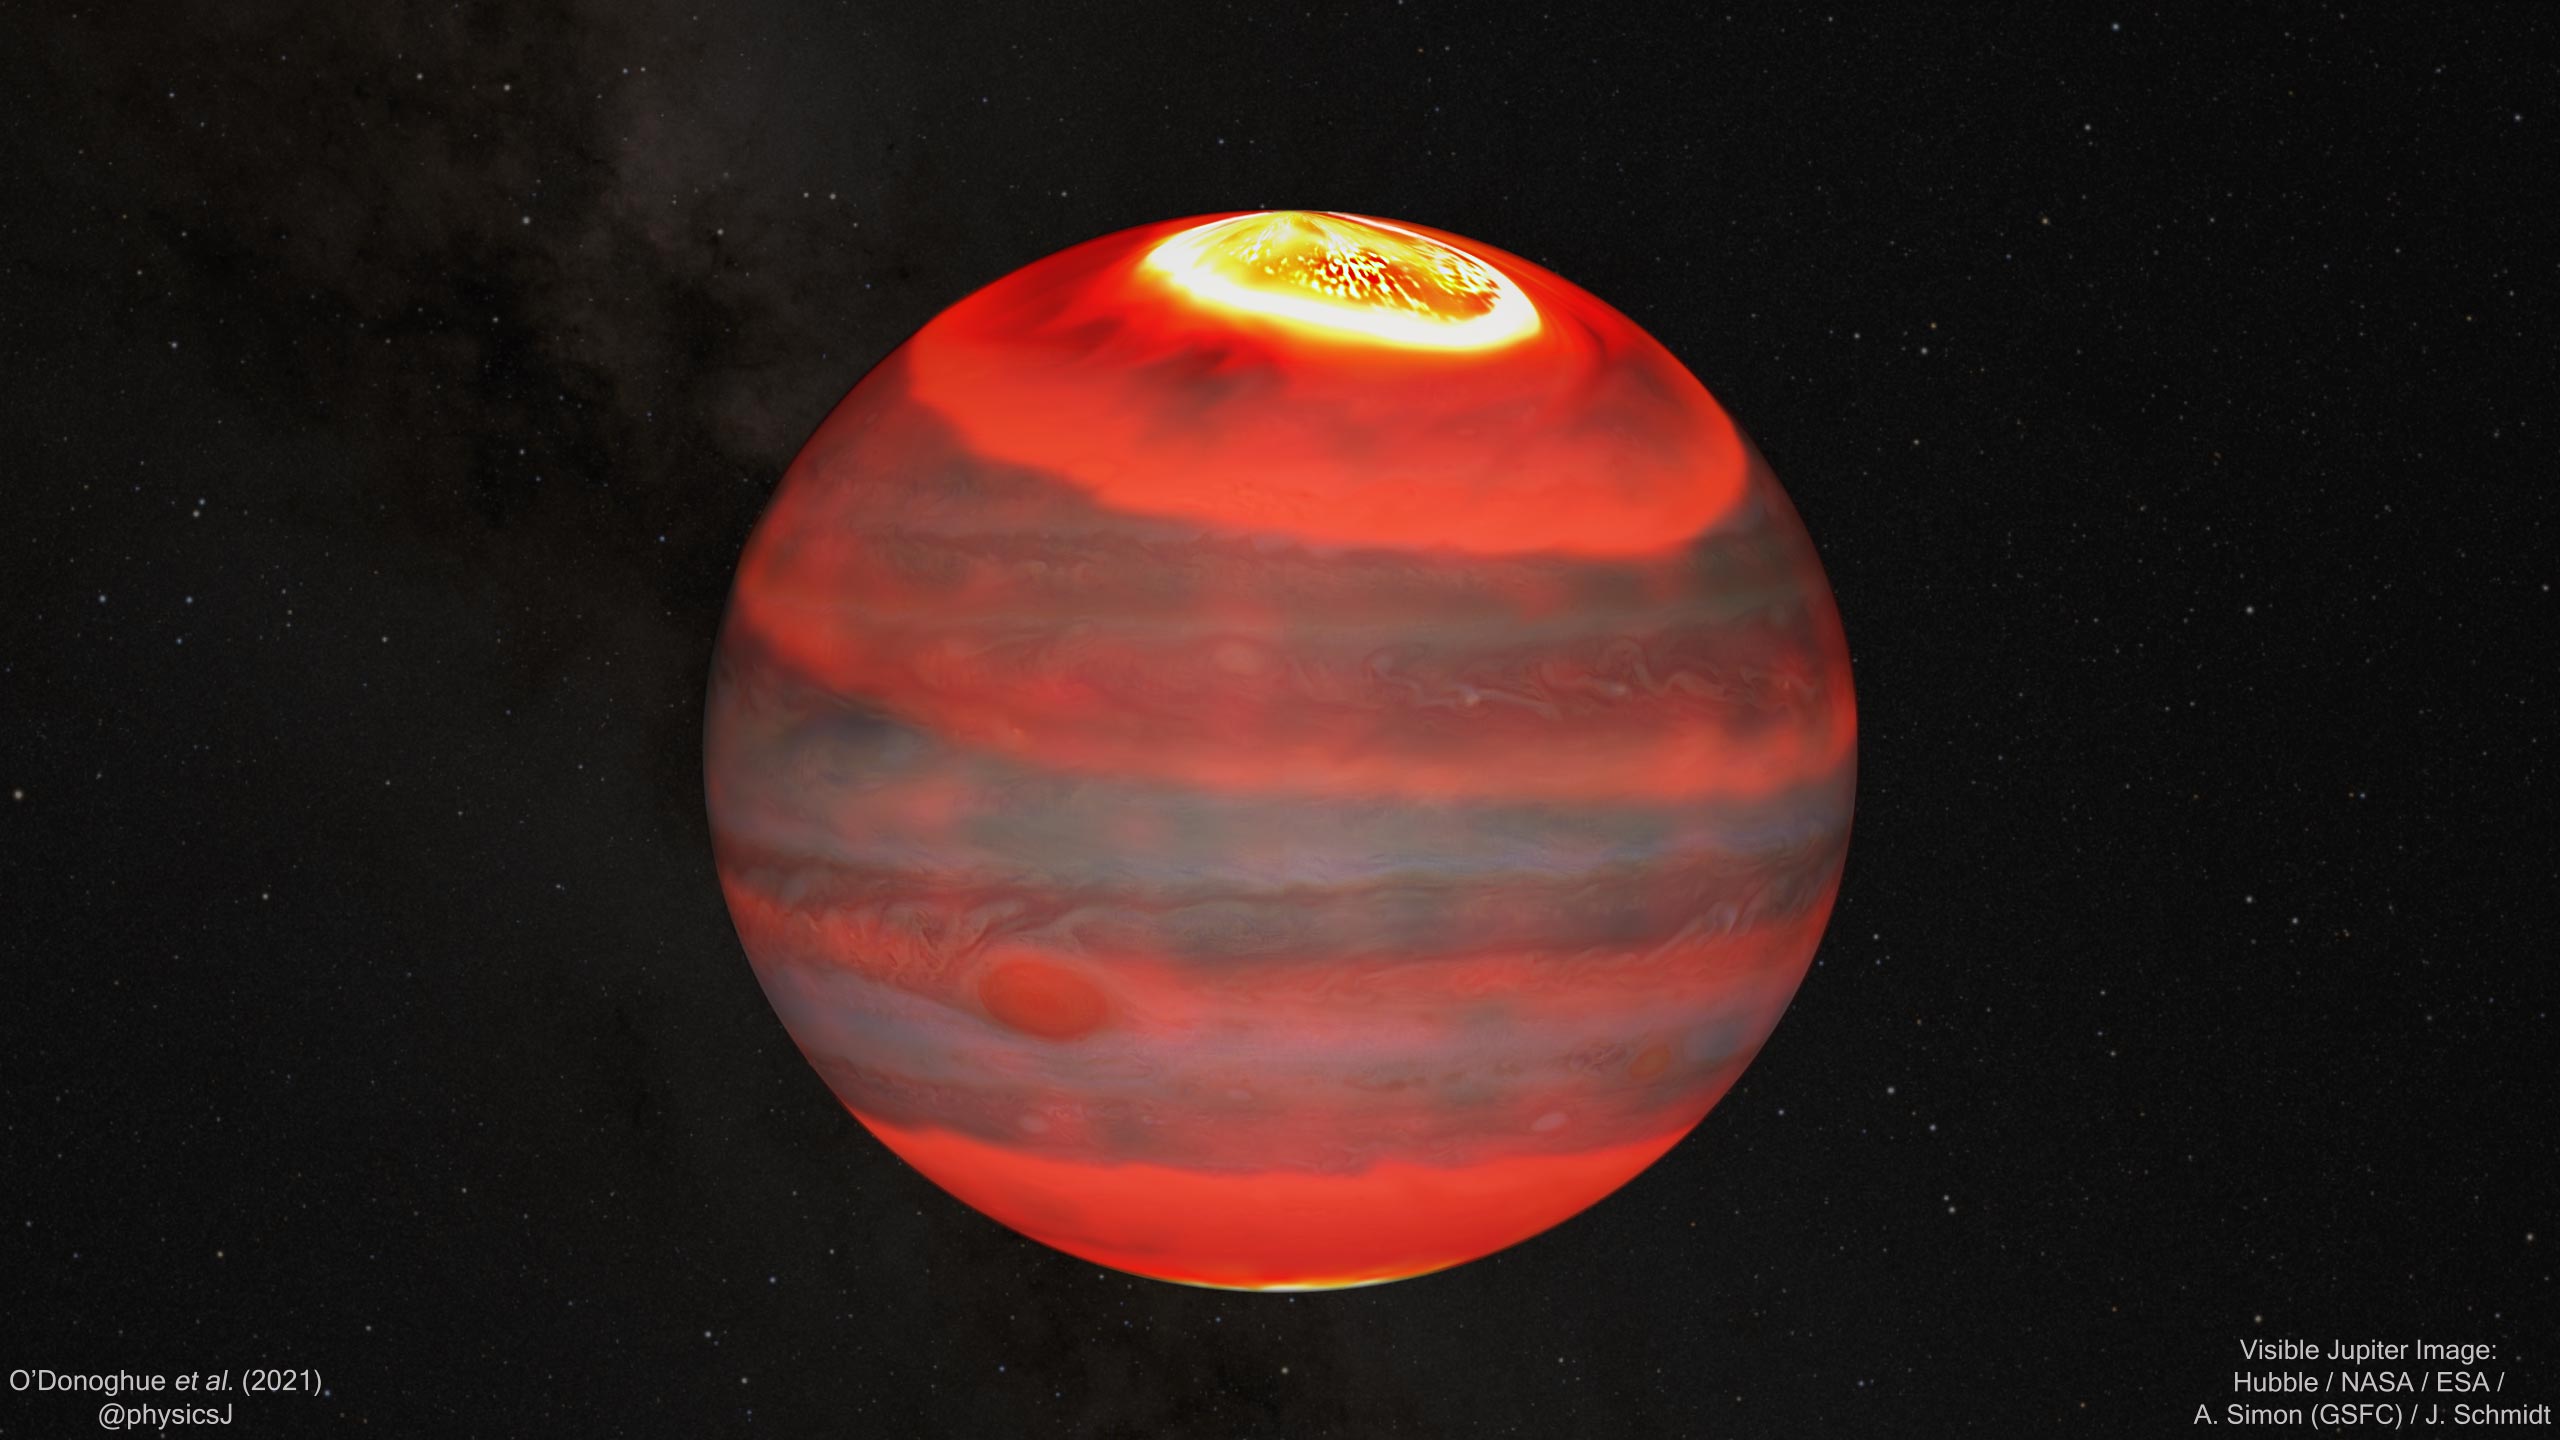 Japanese Scientists: Unexpected Heat Wave in Jupiter's Atmosphere